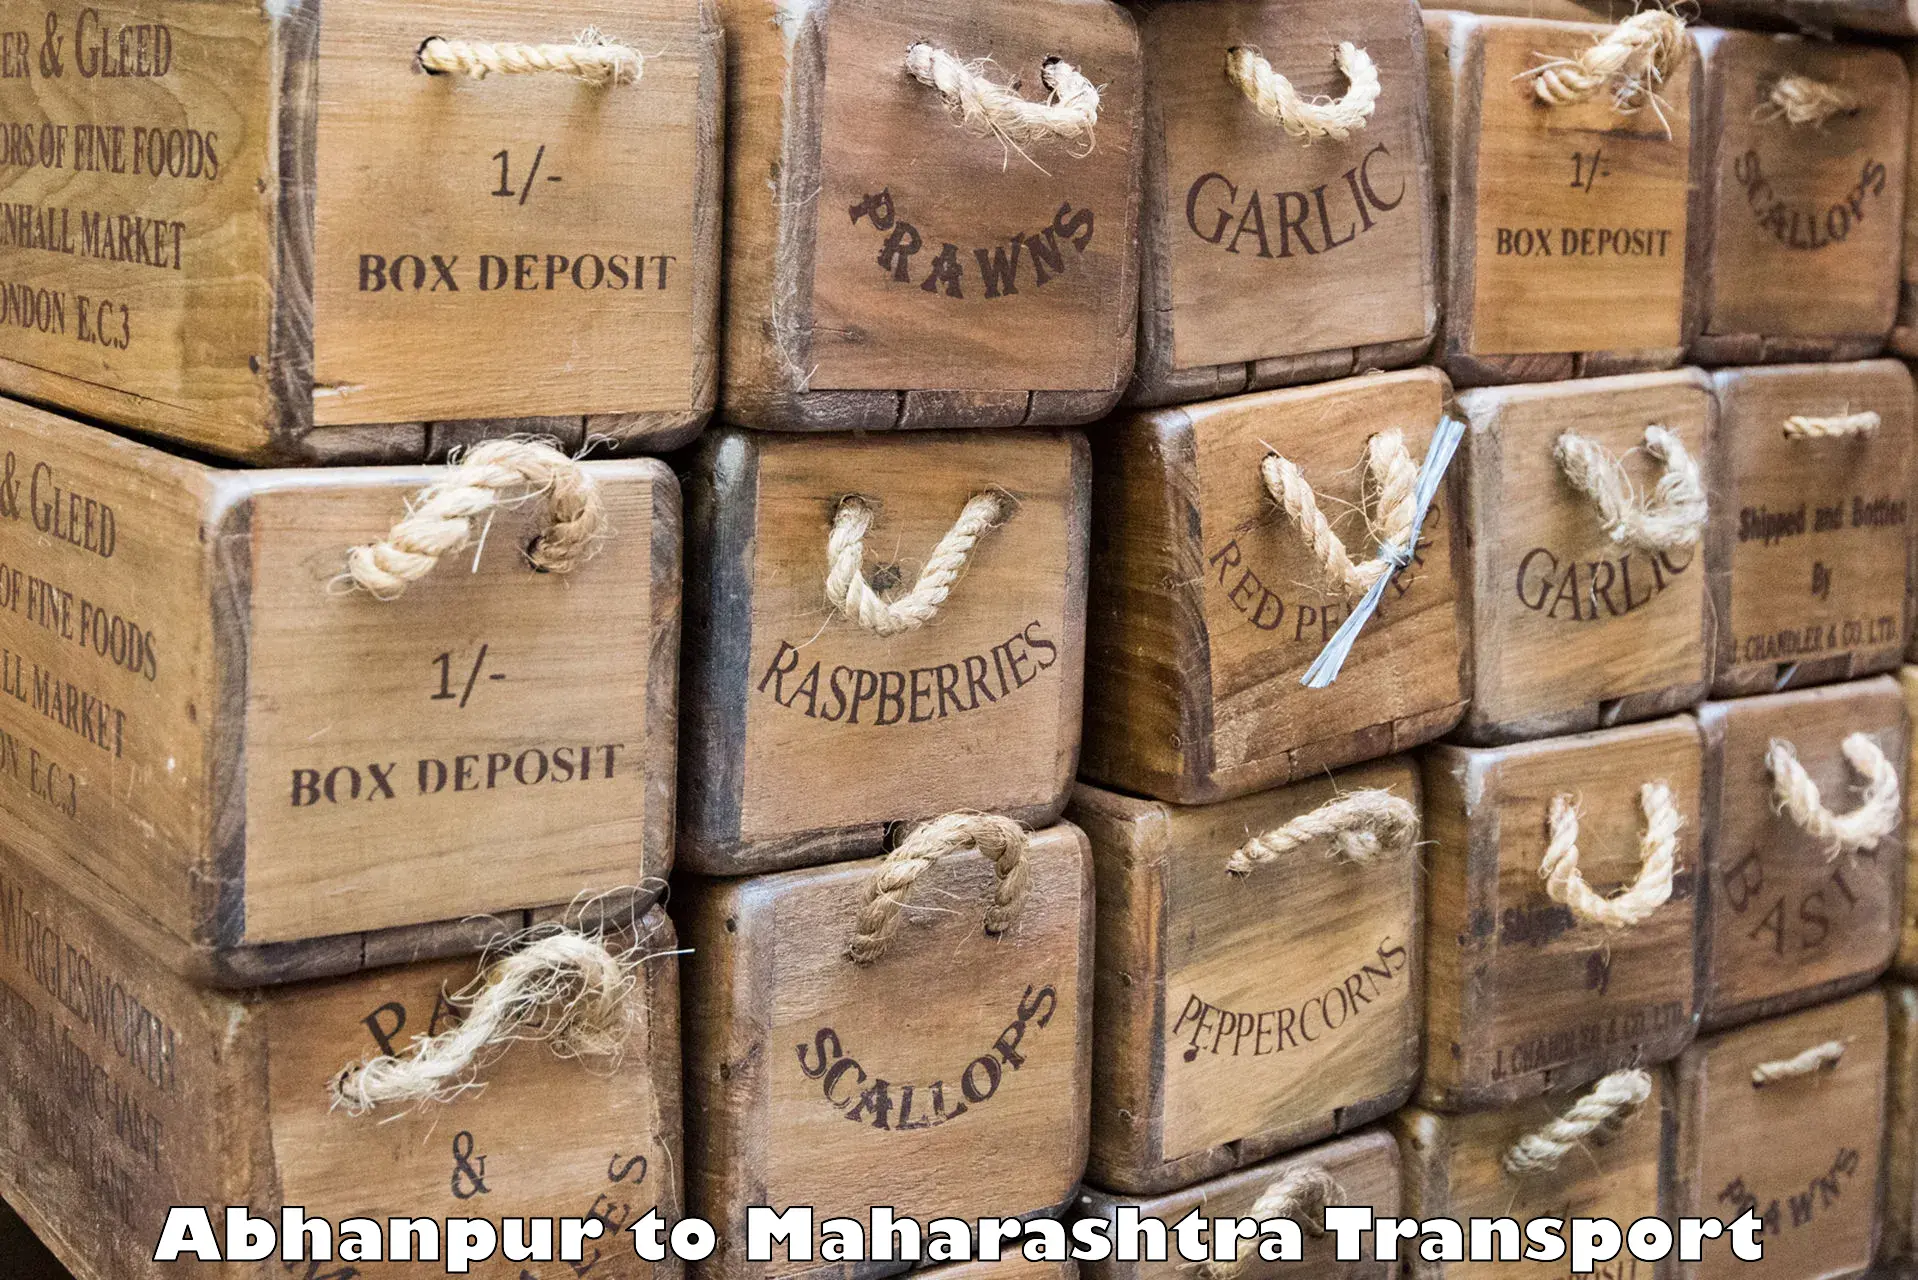 Daily parcel service transport in Abhanpur to Vaijapur